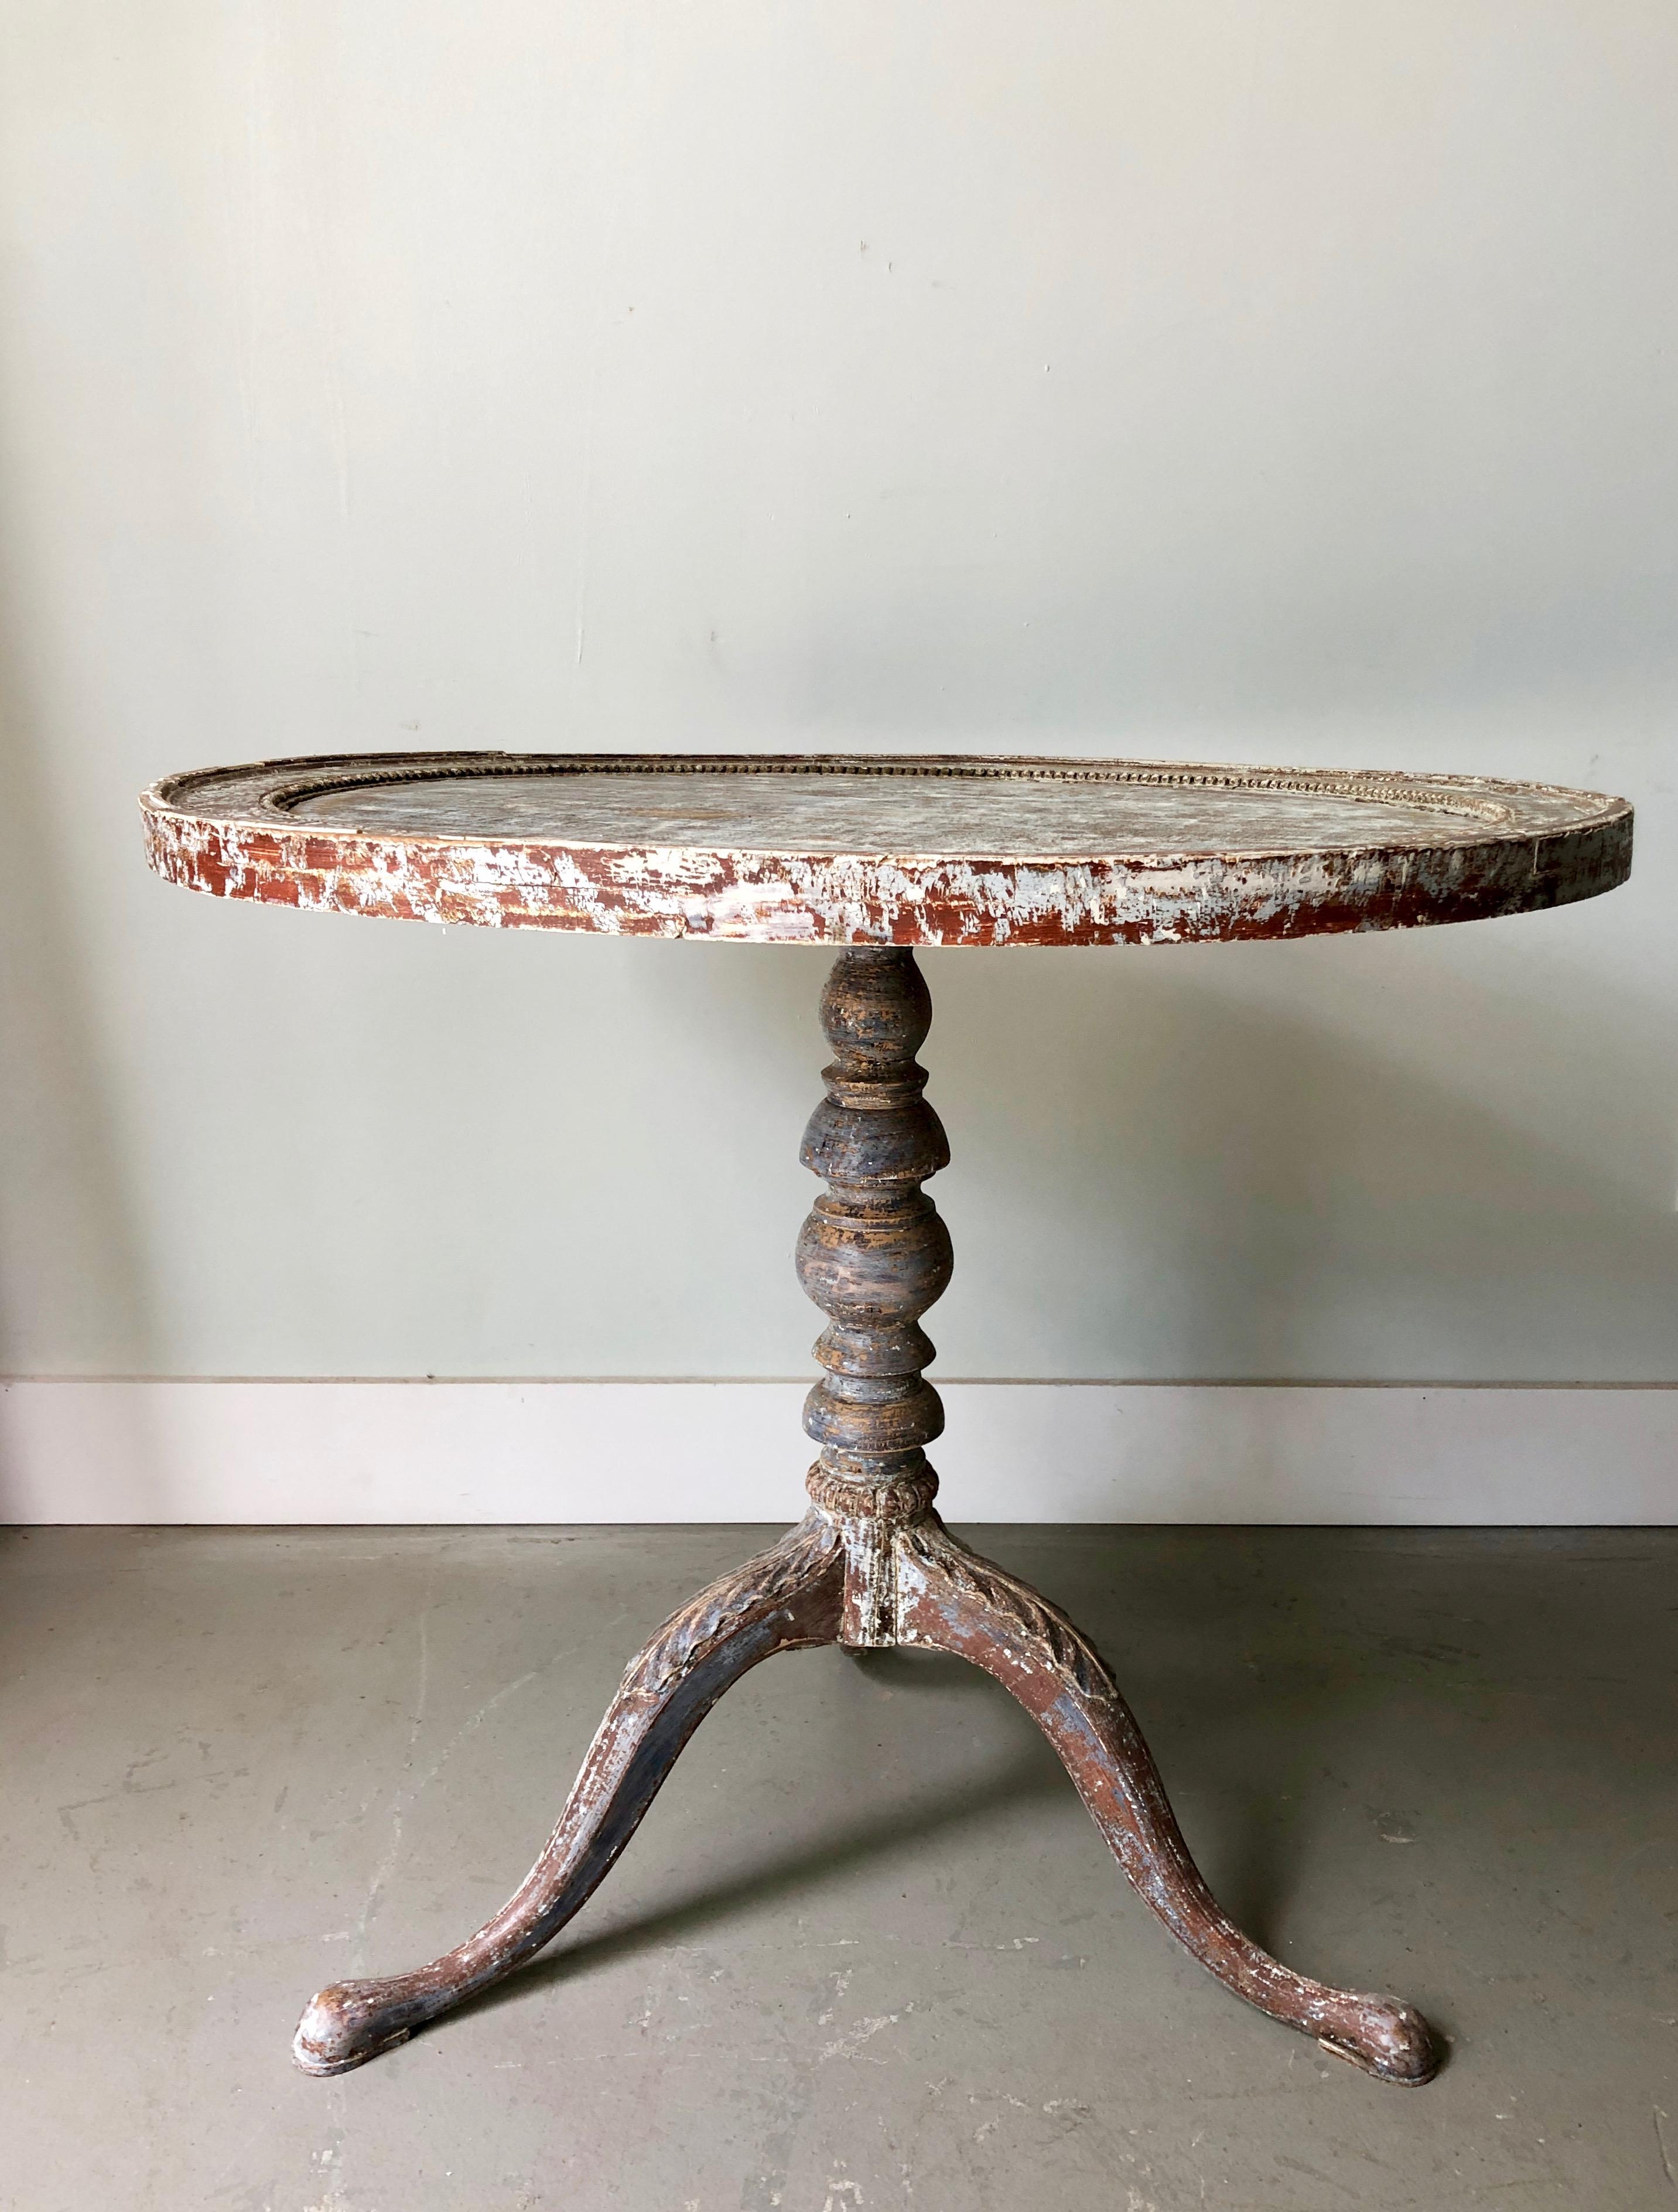 18th century round tray top pedestal table with turned base supported by beautifully carved legs in original color.
Stockholm, Sweden, circa 1710.